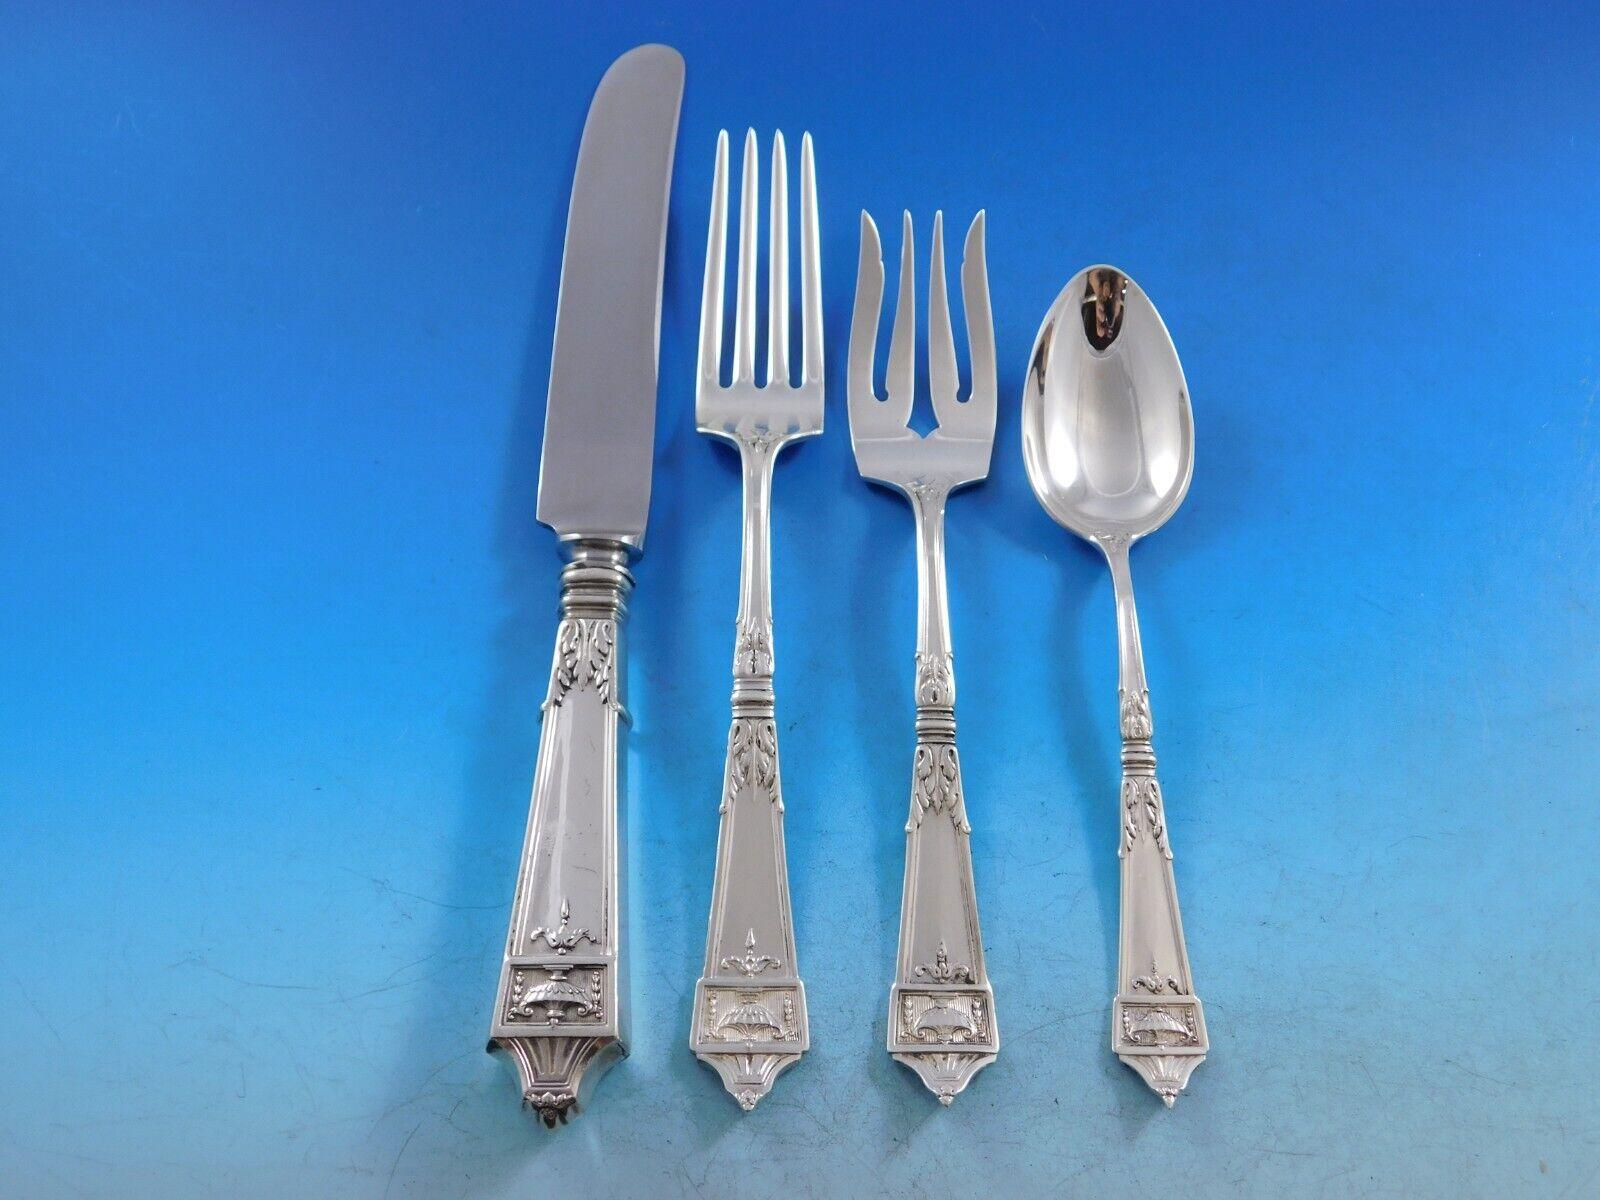 Each piece of Lansdowne is adorned with a distinctive urn design and Greek-style foliage. These design elements beautifully compliment Colonial and Georgian decor.

Gorgeous Lansdowne by Gorham sterling silver Flatware set - 123 pieces. This set